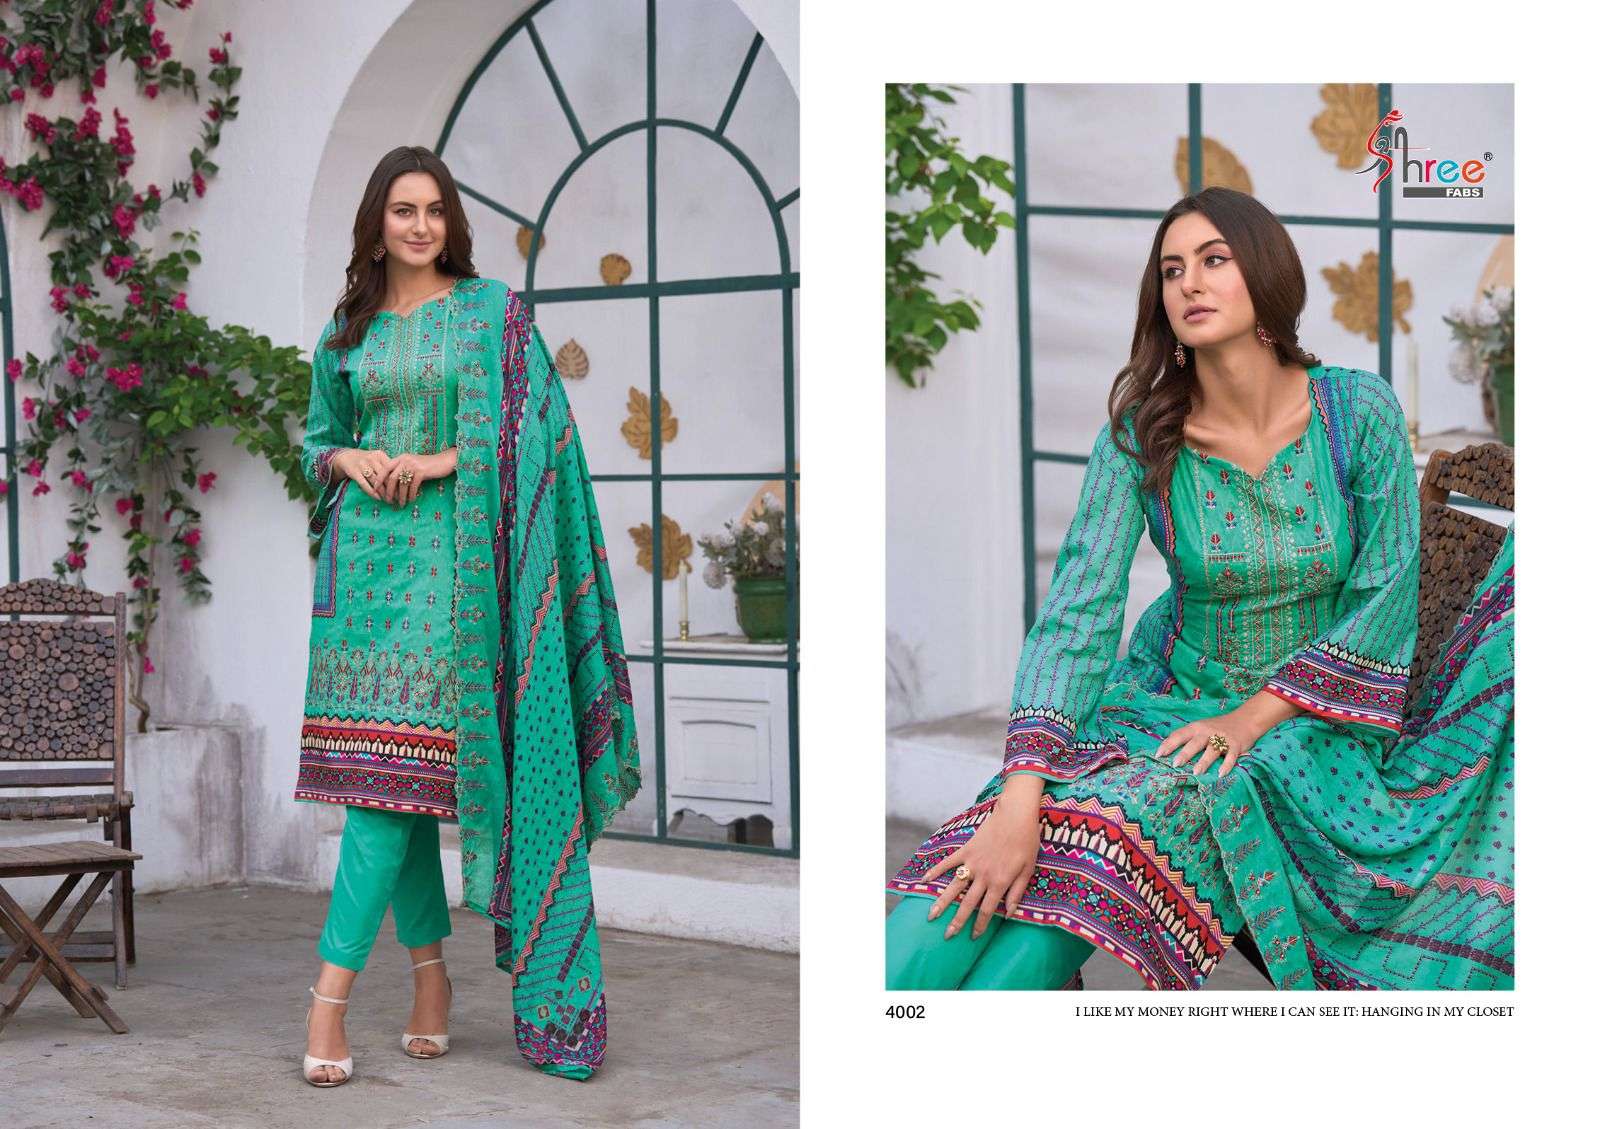 SAIDHARANX BIN SAEED  VOL-4  DESIGNER 3 PIECE CONCEPT COMBO LAWN  COLLECTION IN WHOLESALE RATE IN SURAT